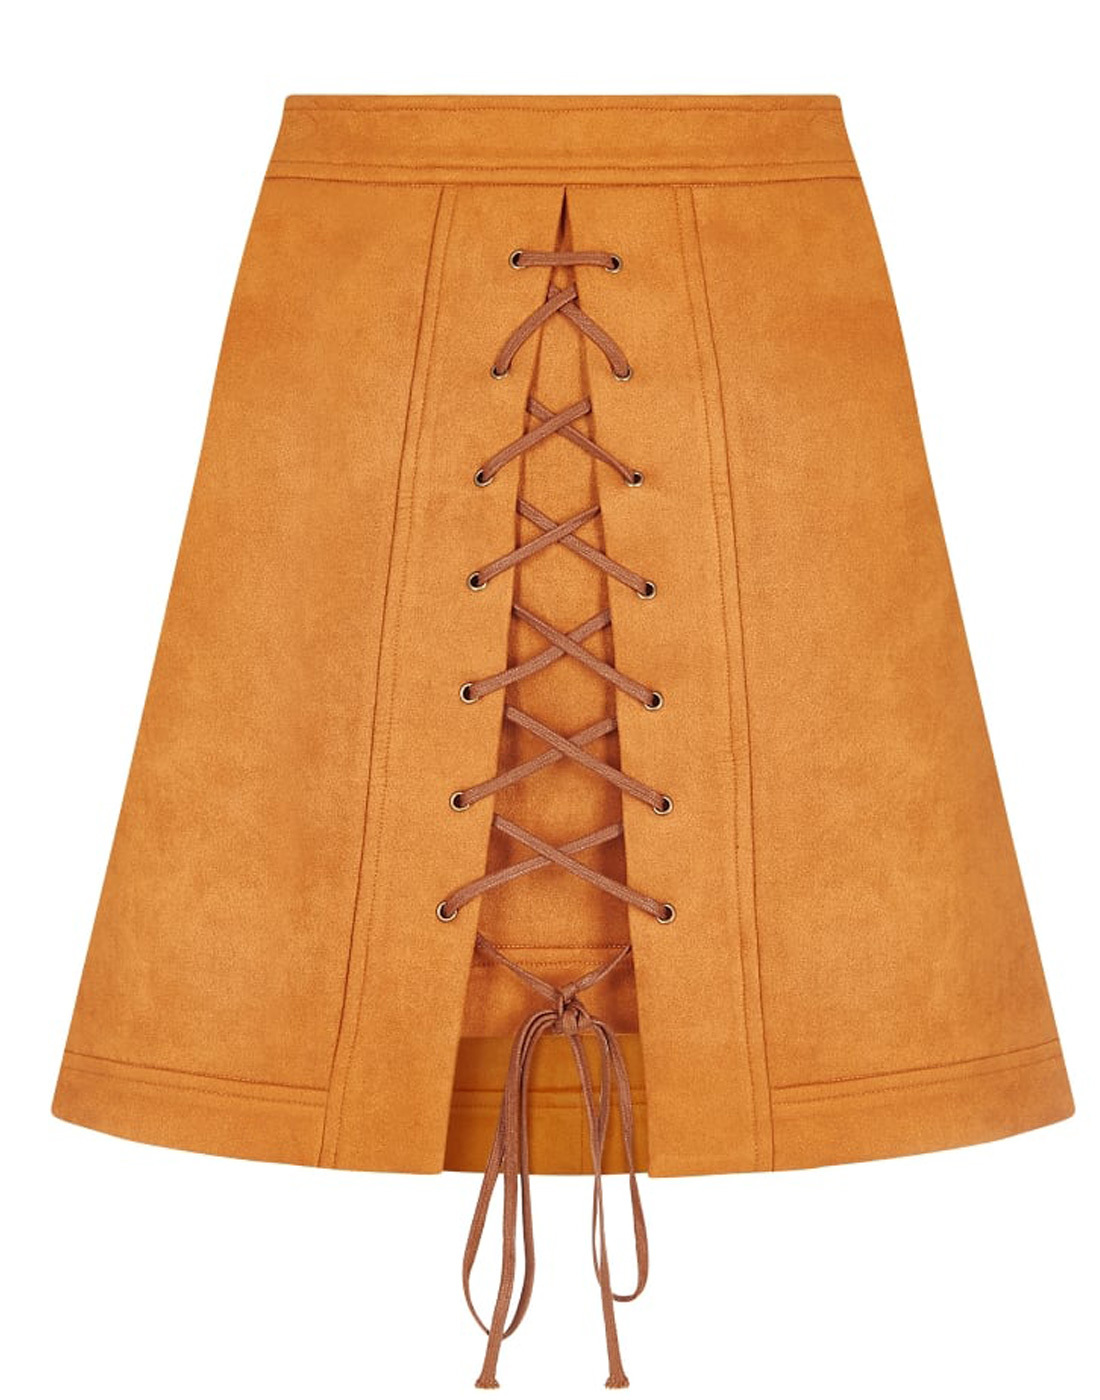 Lilca BRIGHT & BEAUTIFUL 1960s Mod Suedette Skirt